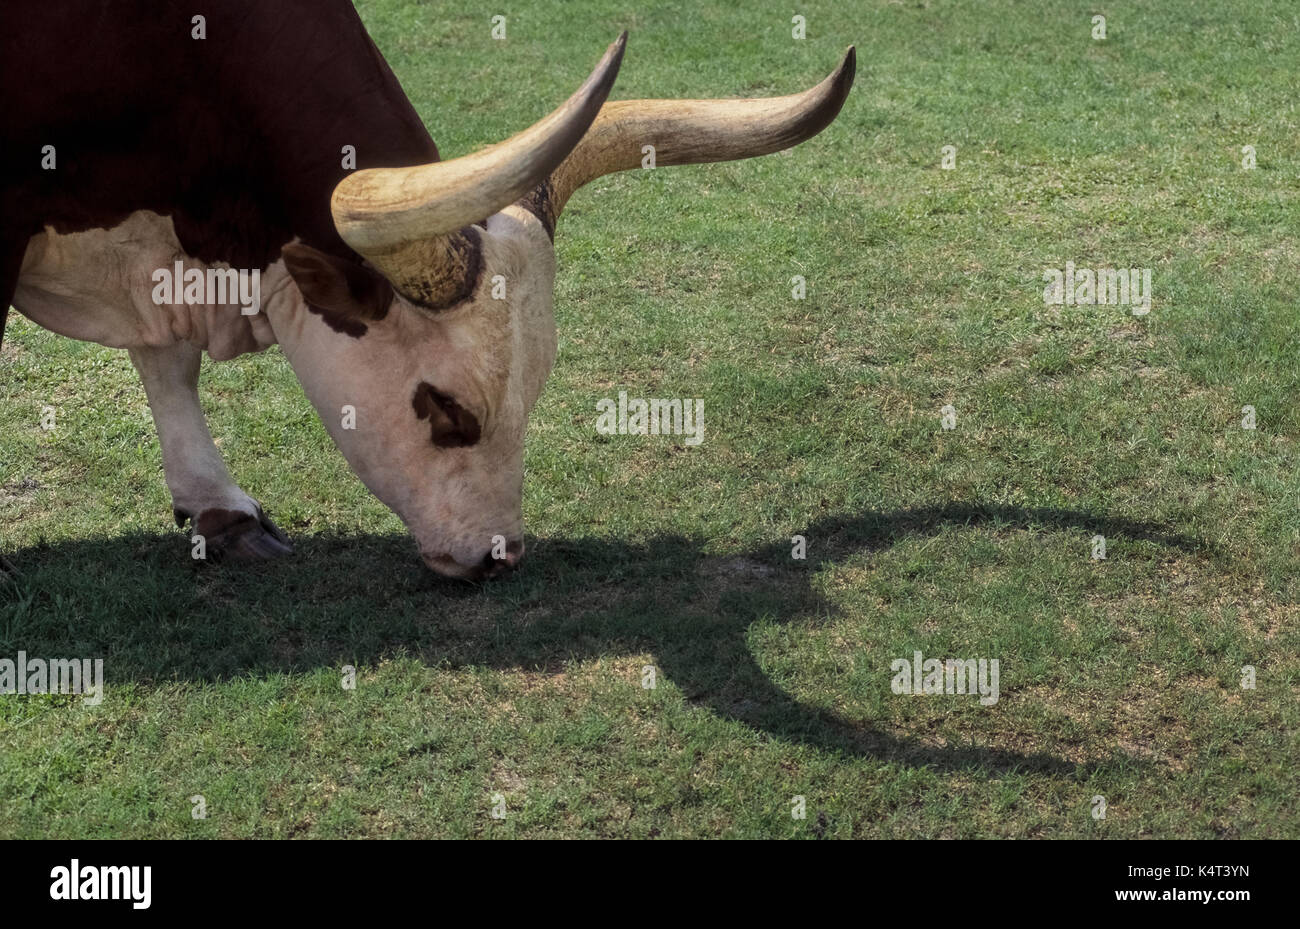 Watusi cattle are native to East Africa and known for their large and long horns, as seen by the shadow made by this young cow grazing in a grassy field in Florida, USA. Considered one of the oldest cattle breeds, Watusi also are known as the Cattle of Kings, Ankole cattle, and Royal Ox. Stock Photo